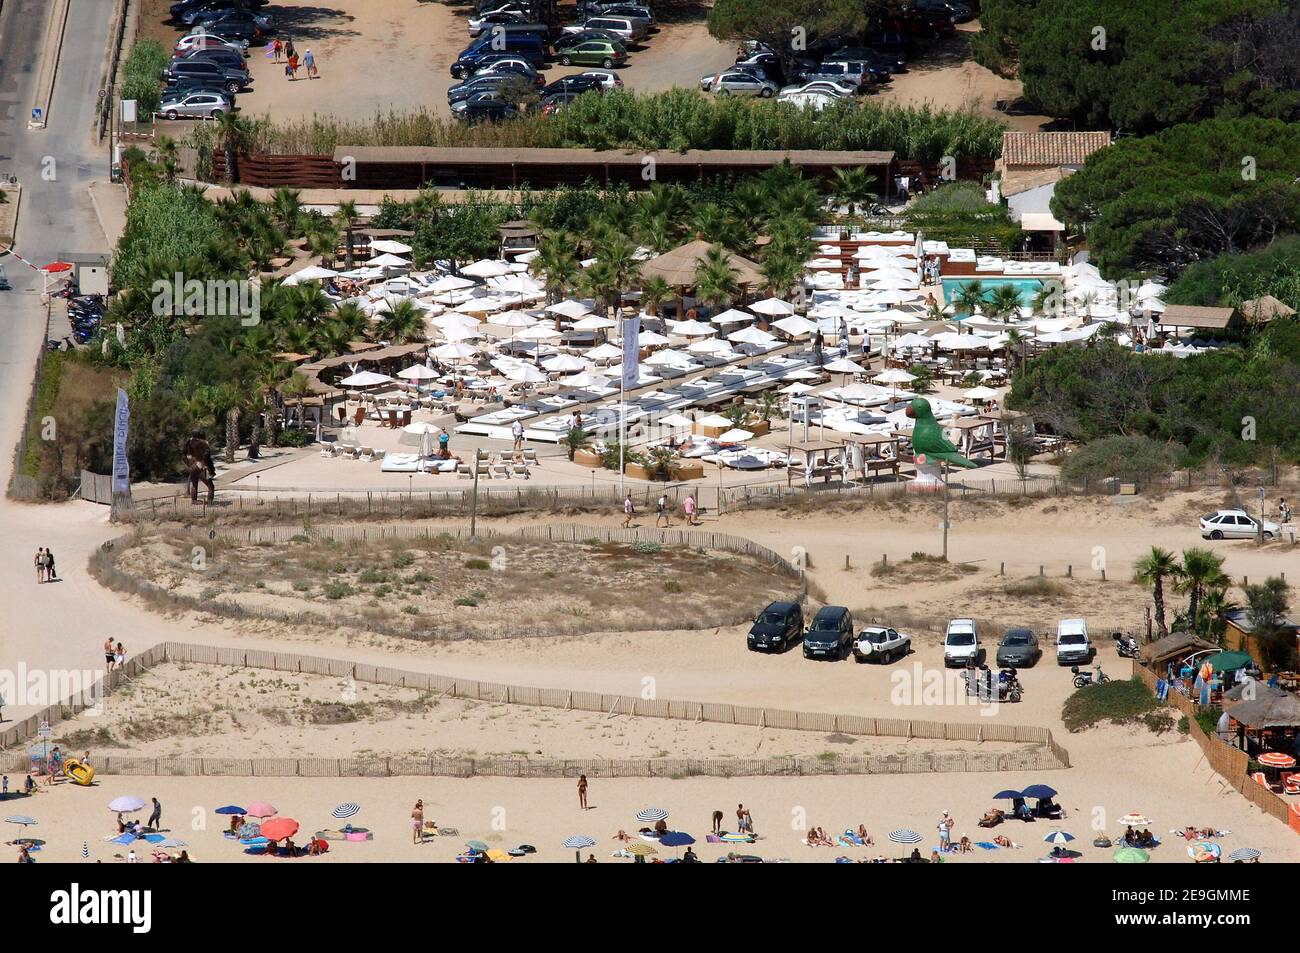 Aerial views of the Nikki Beach in Saint-Tropez, France on July 29, 2006. Pamela Anderson and Kid Rock wedding party will take place here tonight. Photo by ABACAPRESS.COM Stock Photo